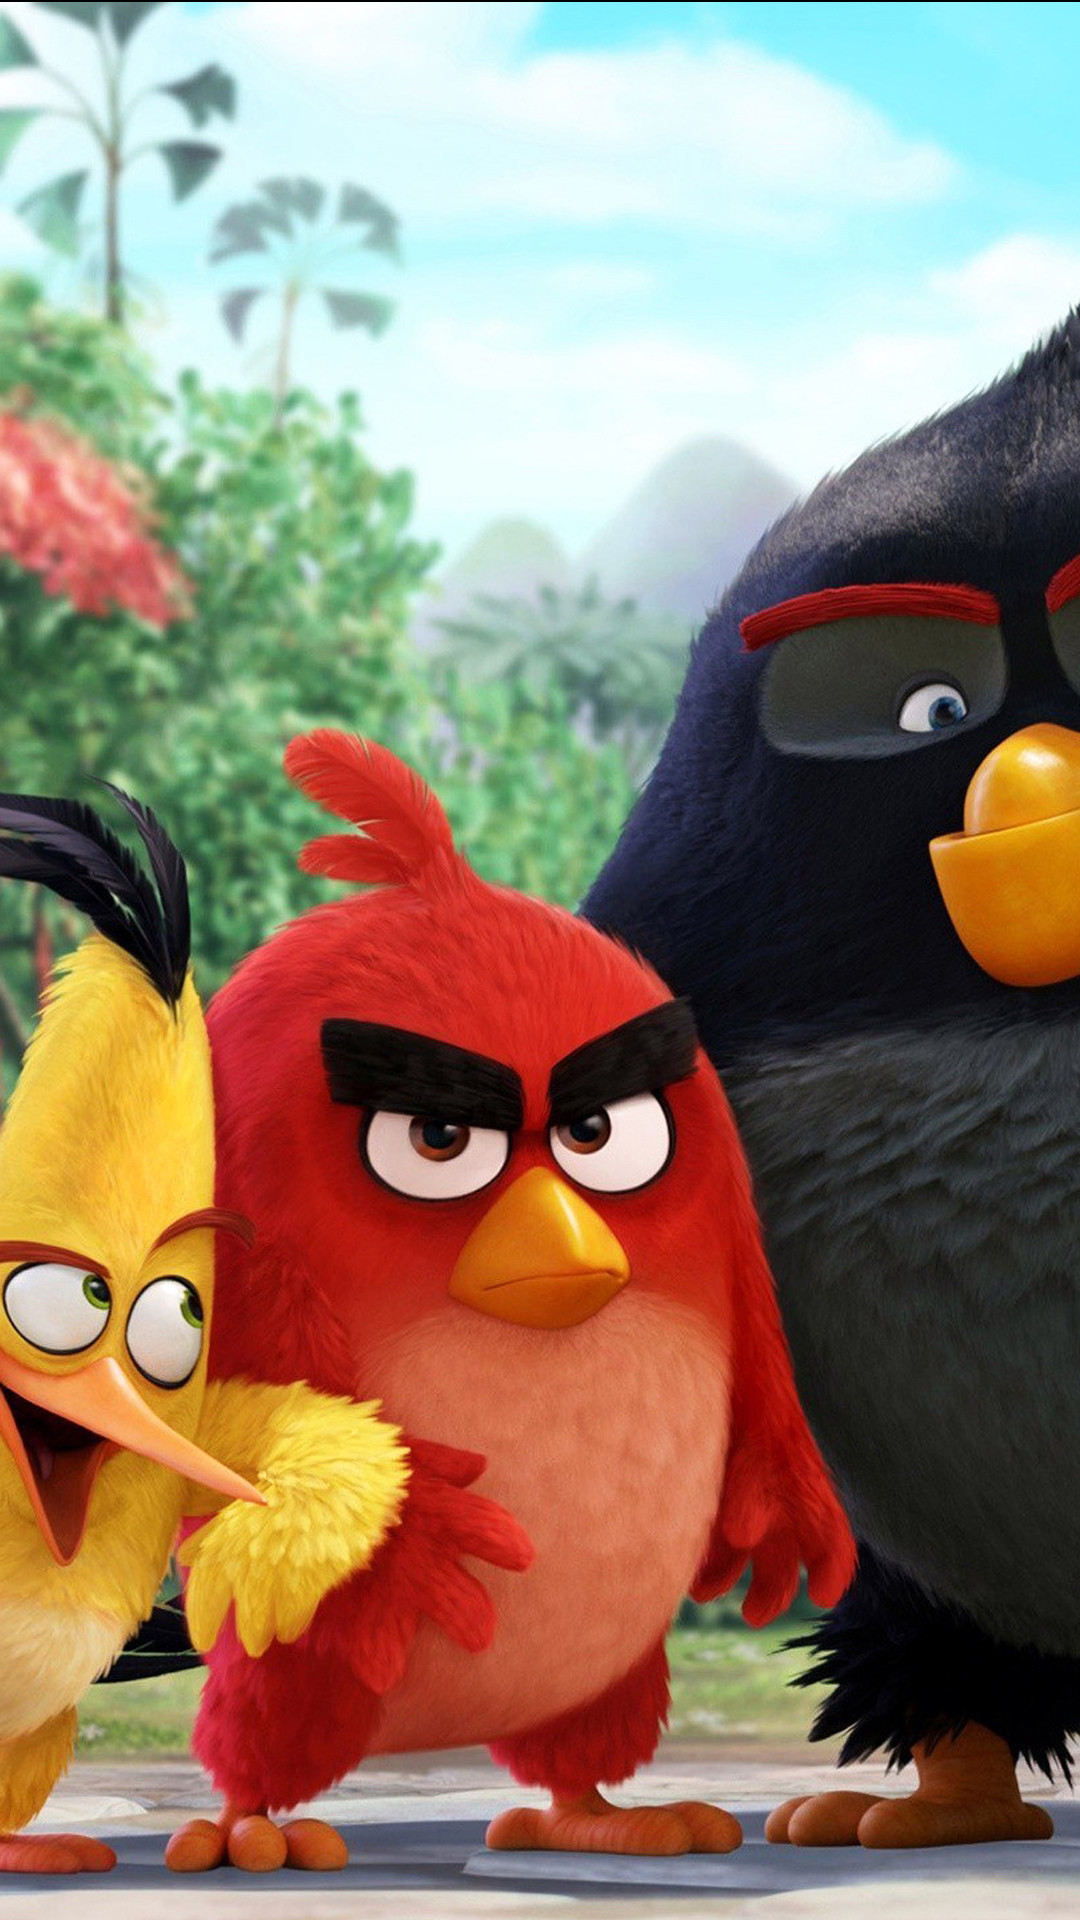 1080x1920 Angry Birds Movie Characters iPhone 6+ HD Wallpaper